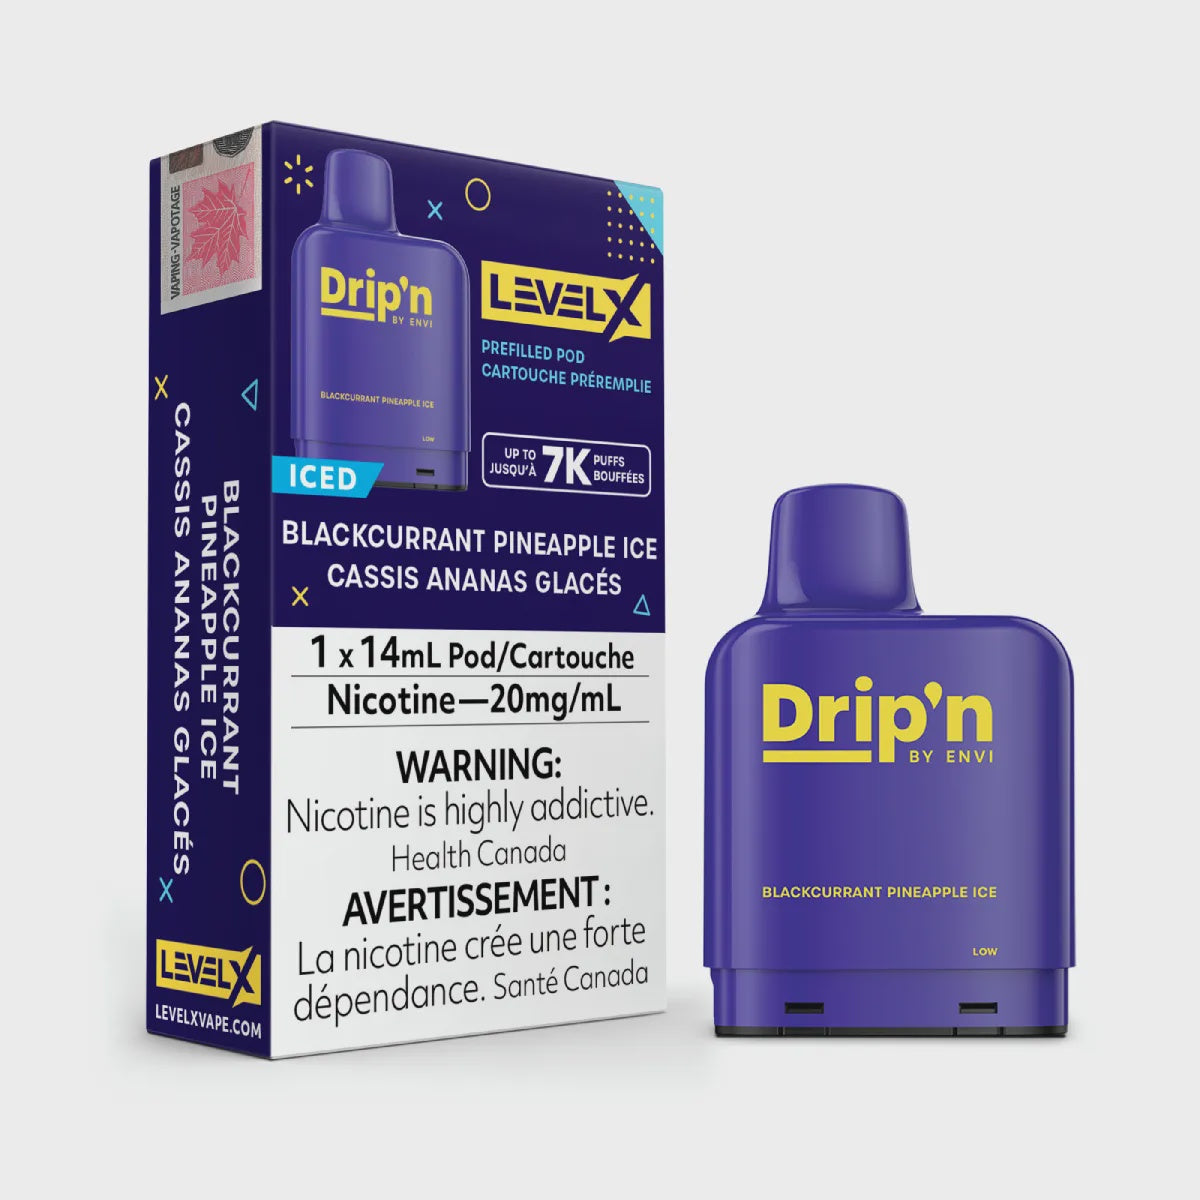 Drip'n - Blackcurrant Pineapple Ice Level X Pods